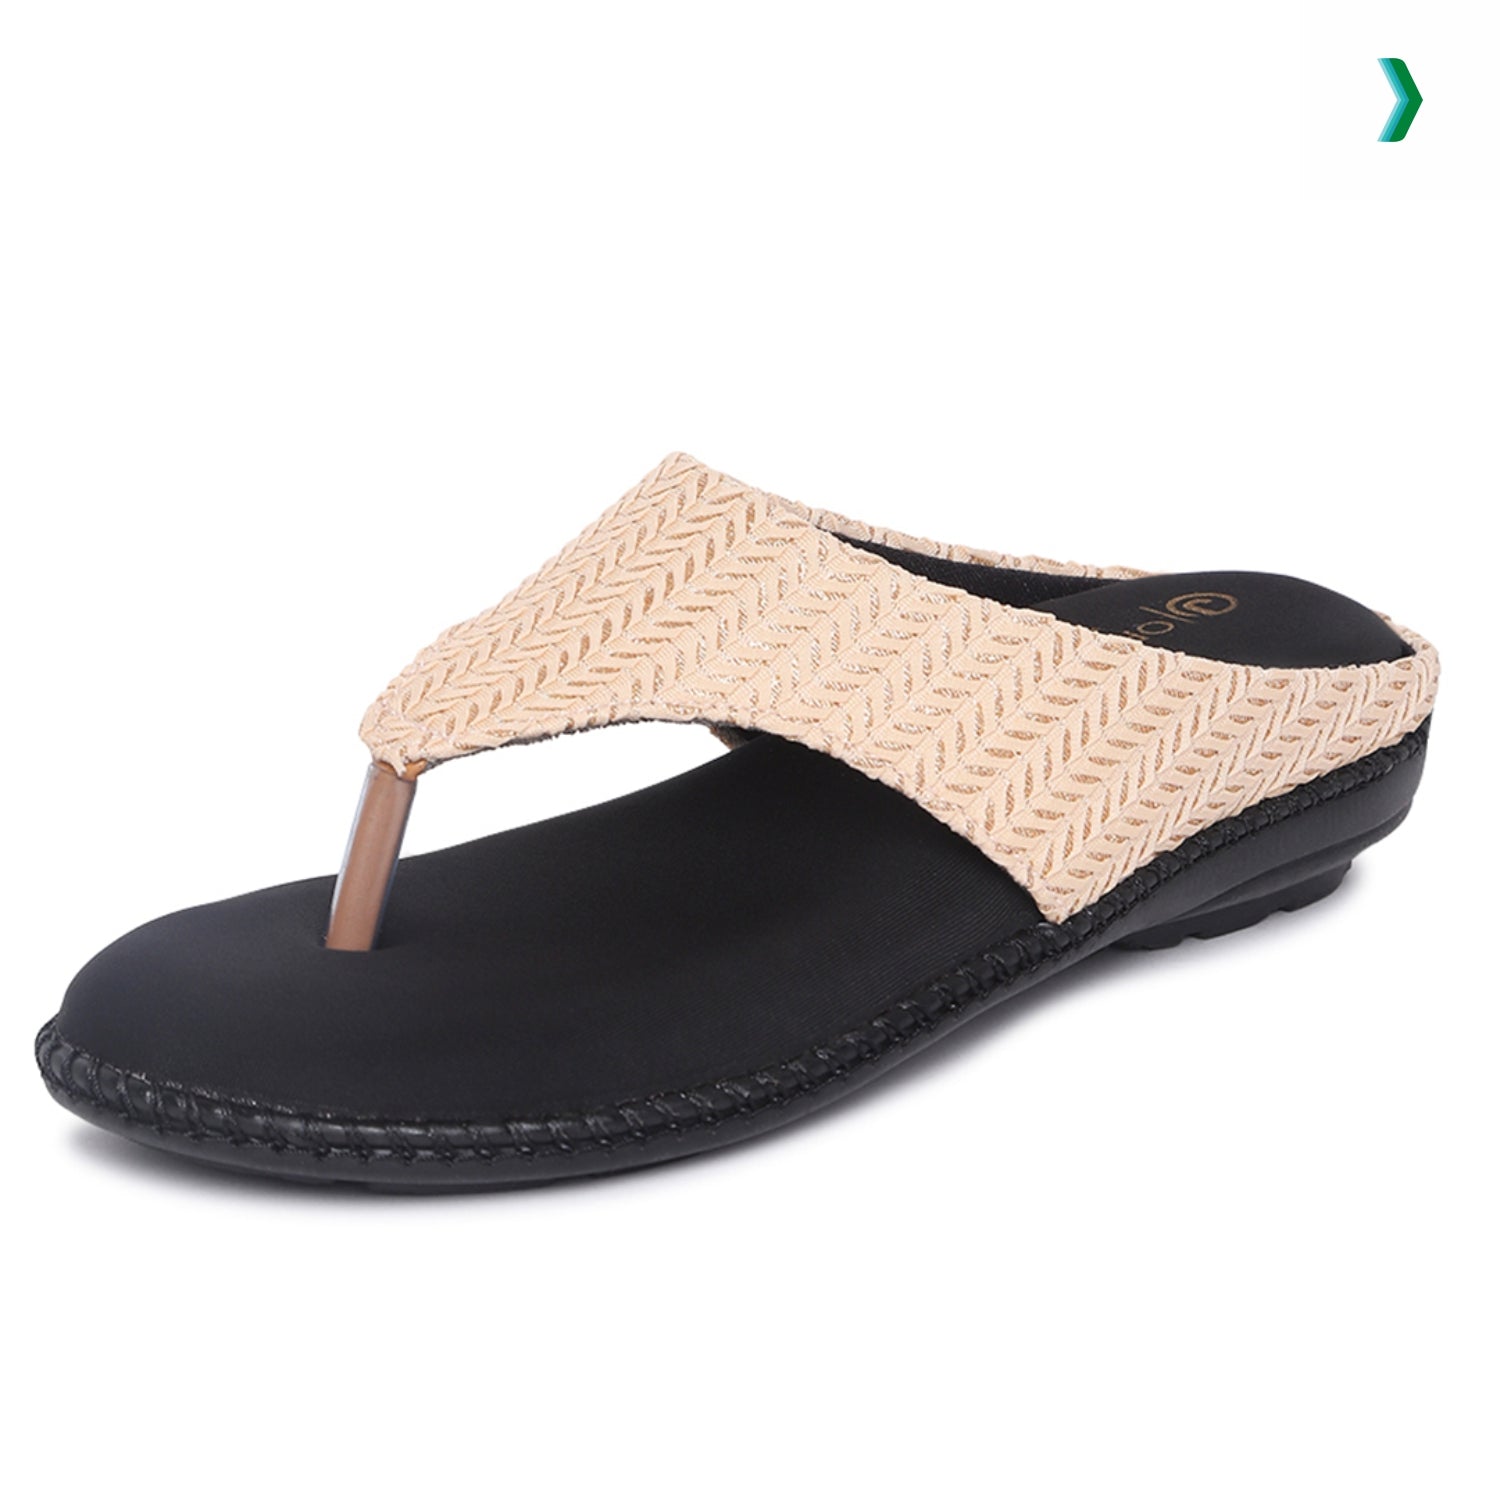 soft doctor chappal for ladies, best ortho slippers